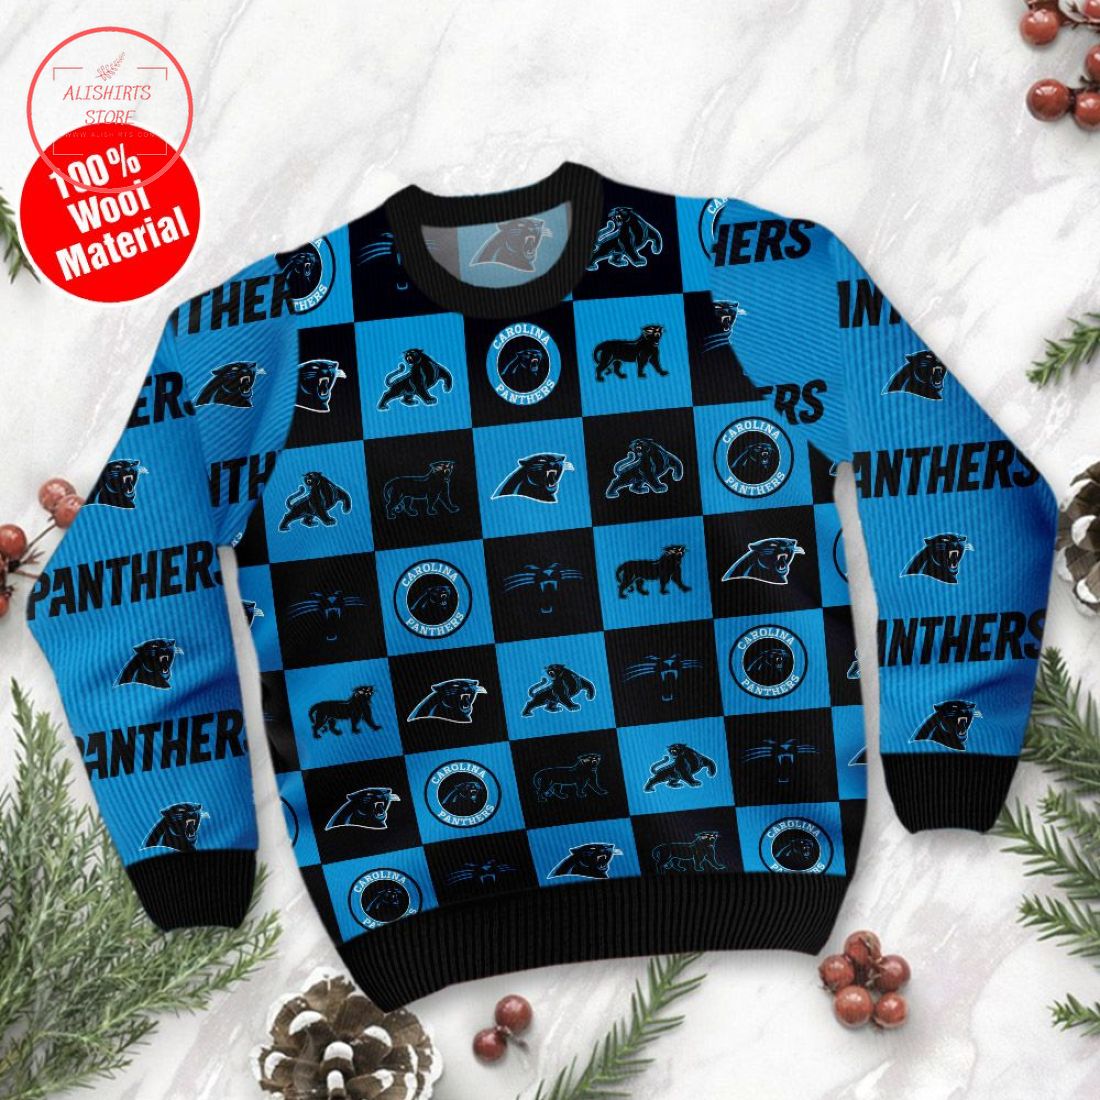 Carolina Panther logo checkered flannel ugly Christmas sweater